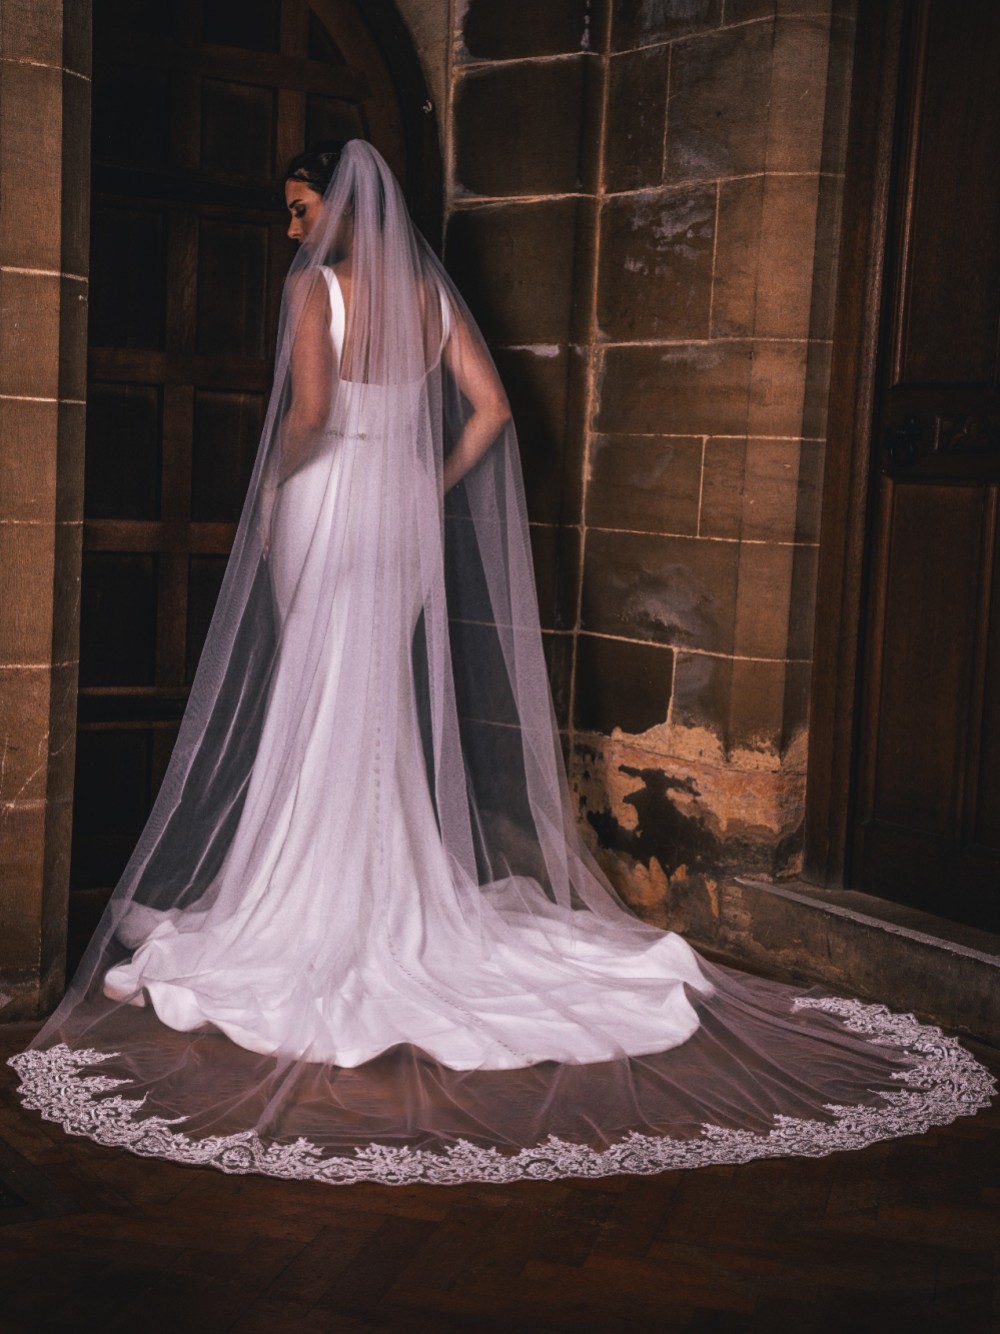 Photograph of Perfect Bridal Ivory Single Tier Corded Lace Edge Veil